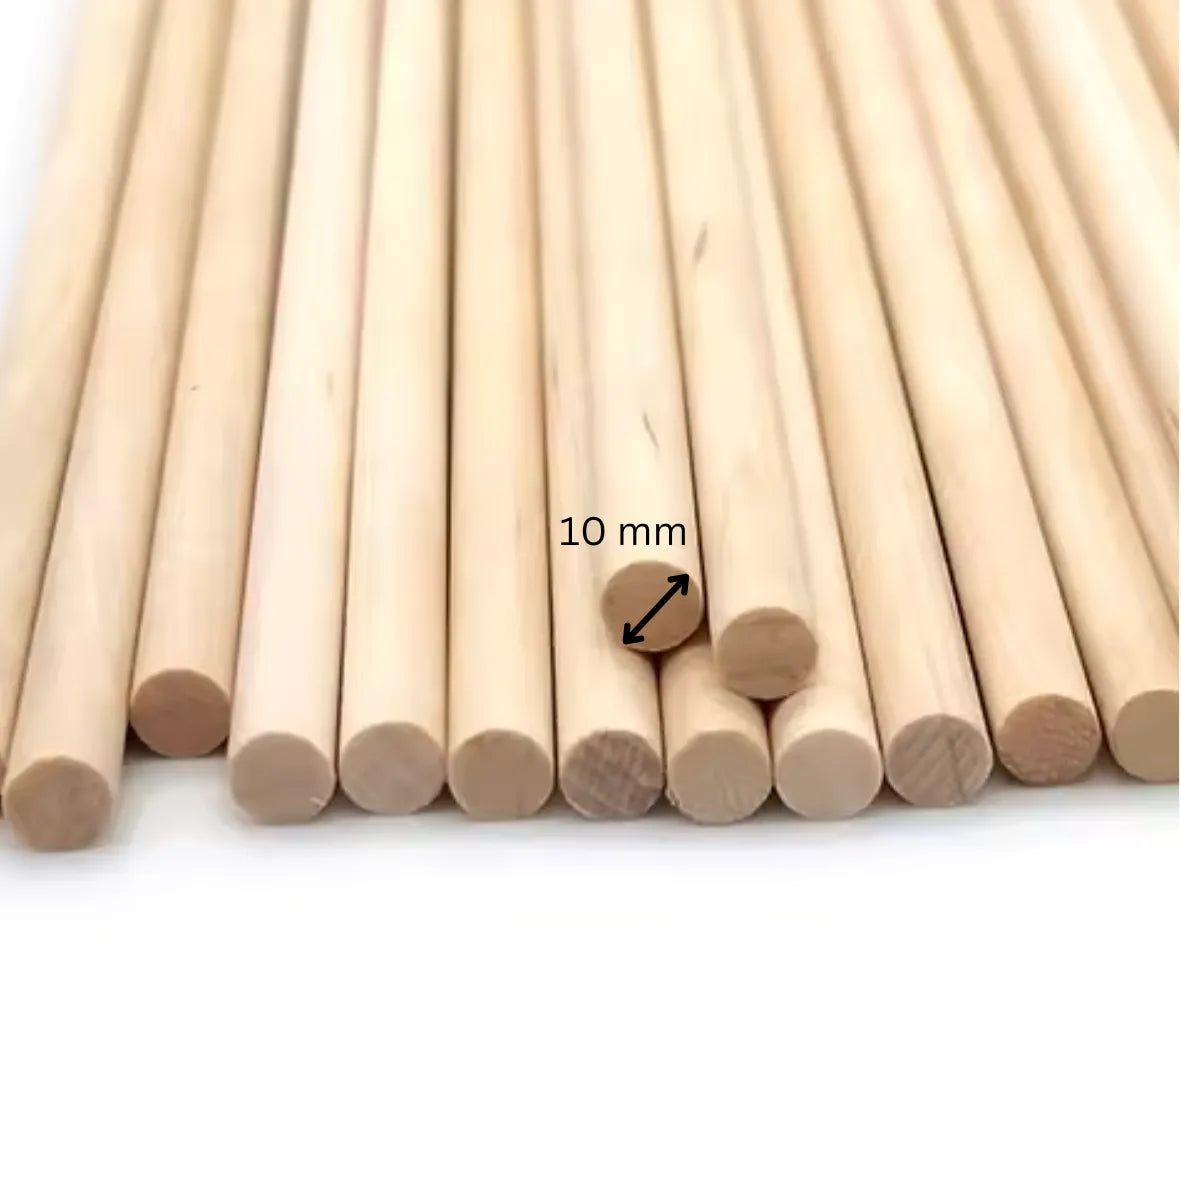 Wooden Cake Dowels 12 inch-Pack of 6 - thebakingtools.com